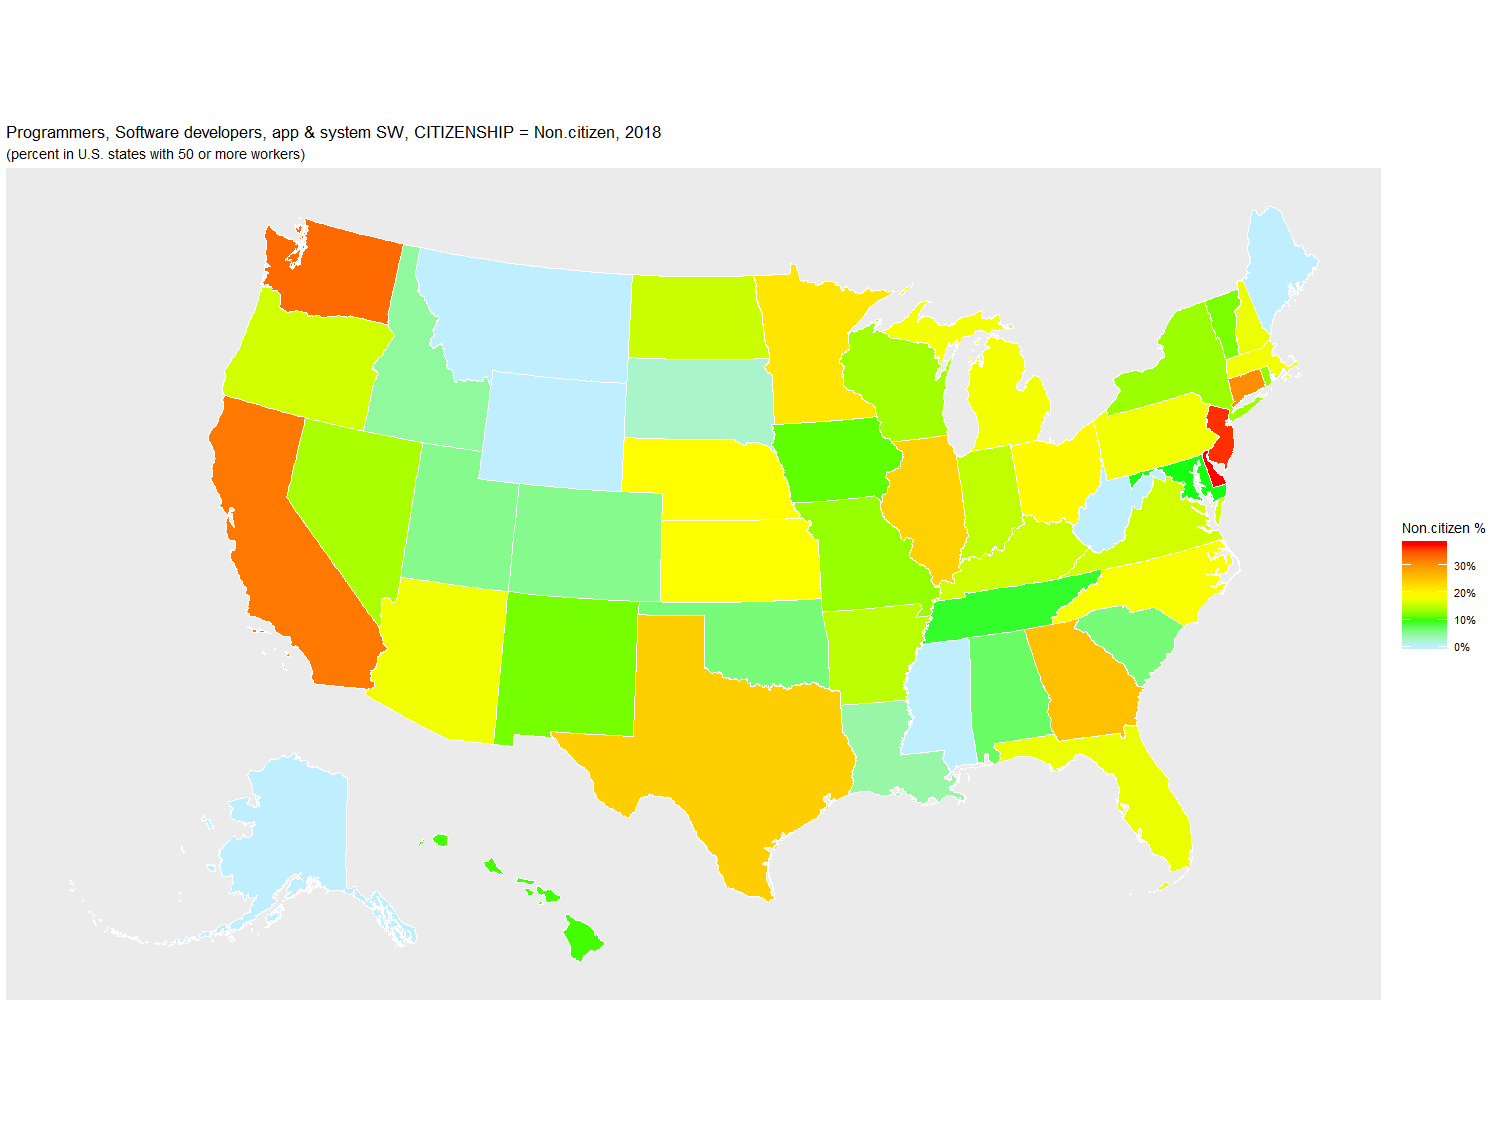 Non-citizen Percentage of Programmers, Software developers, app & system SW by U.S. State, 2018